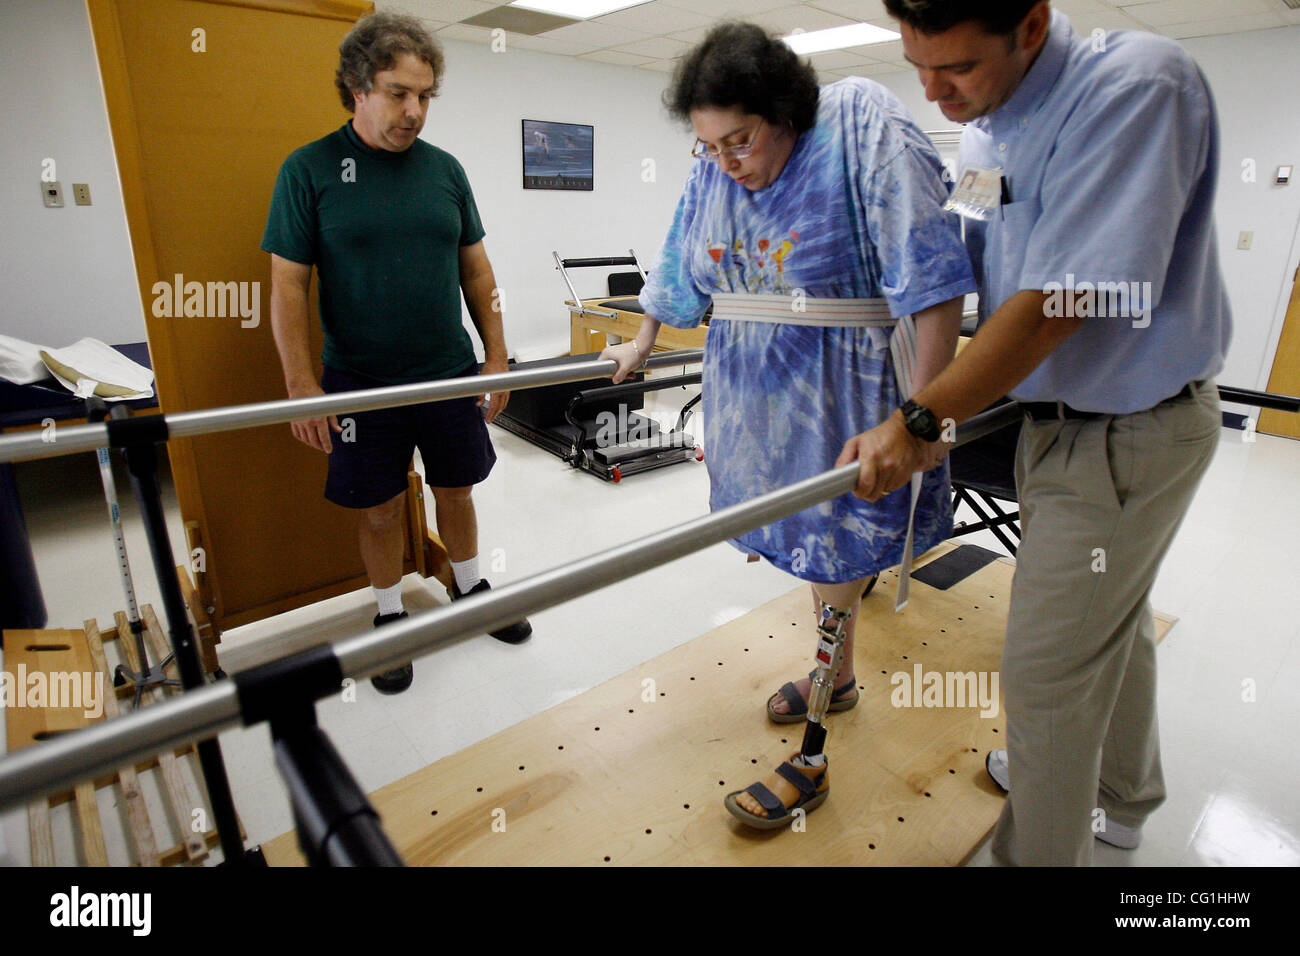 Aug 16, 2007 - Atlantis, FL, USA - Elissa Wehner walks on the parallel bars with the help of her physical therapist, Kenneth O' Sullivan, while her husband, Tom Wehner looks on.  Elissa Wehner goes to rehabilitative therapy at JFK hospital's outpatient facility on August 16, 2007 (Credit Image: © J. Stock Photo